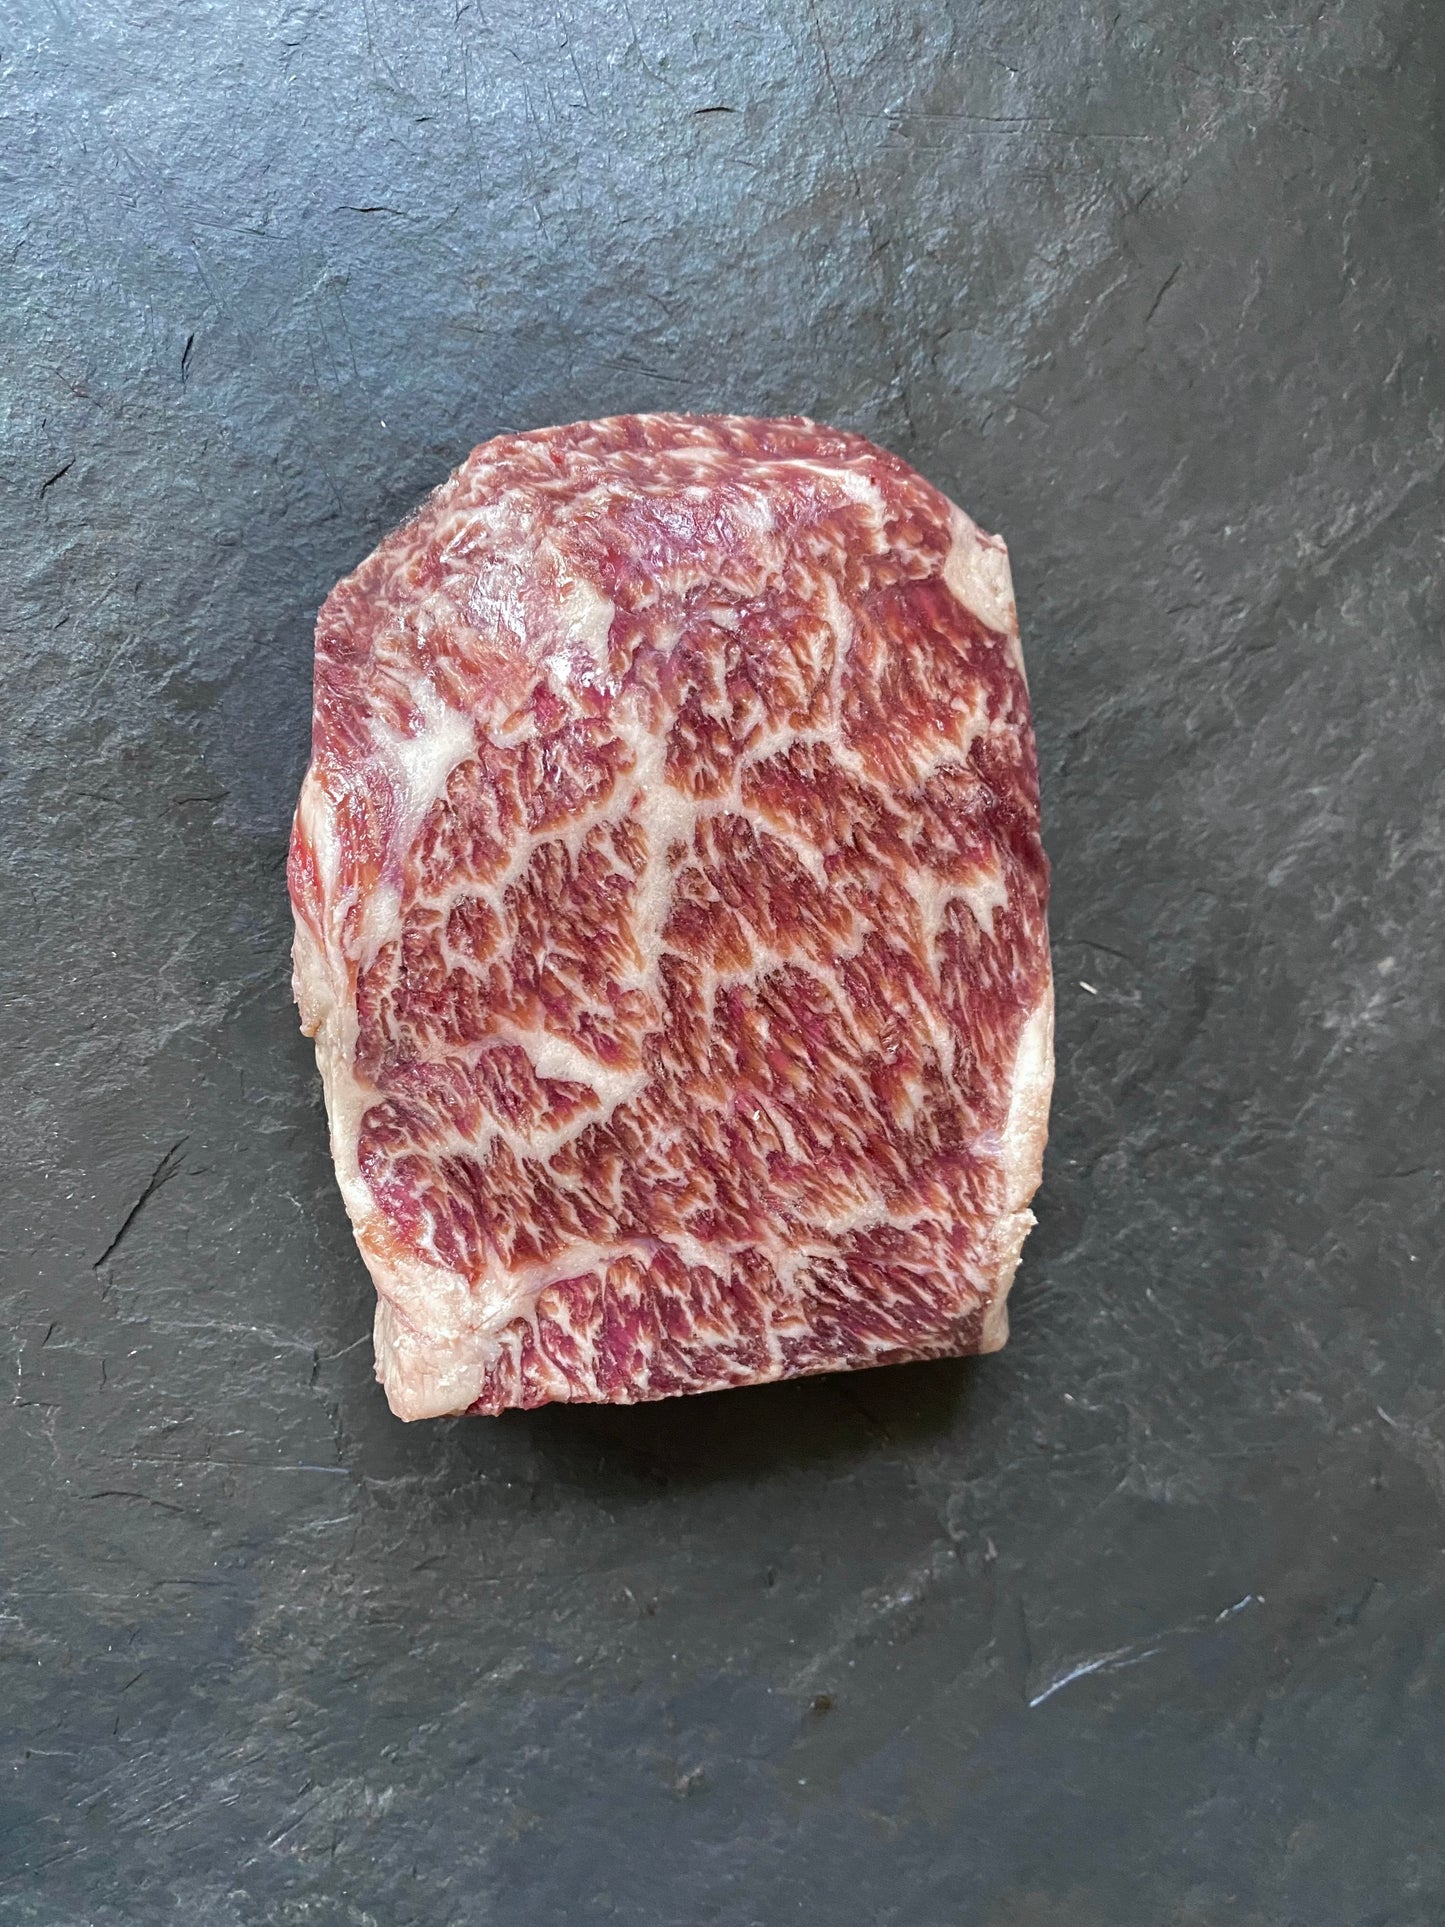 American Wagyu- Monthly Package Special